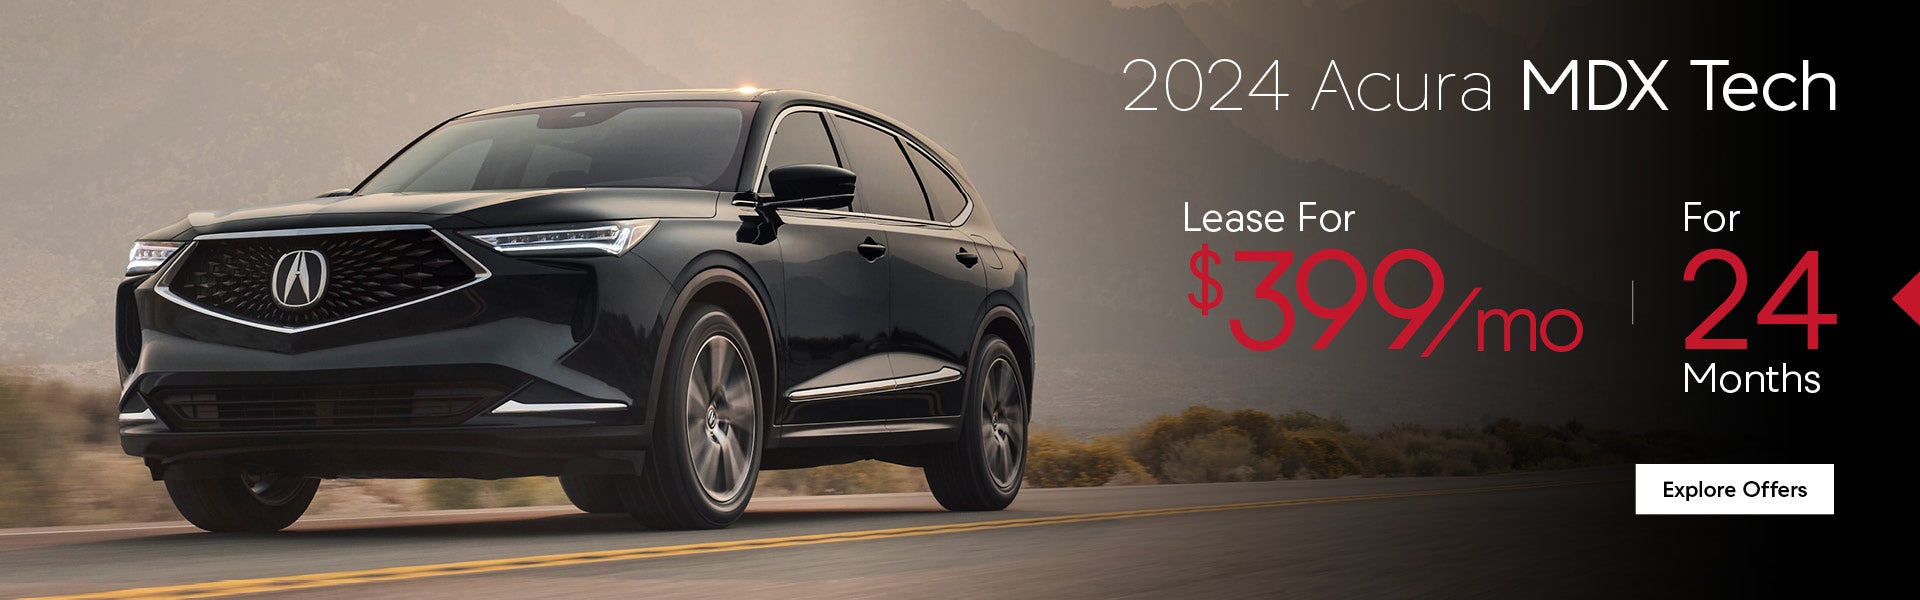 2024 Acura MDX Tech Lease For $399/mo for 24 Months